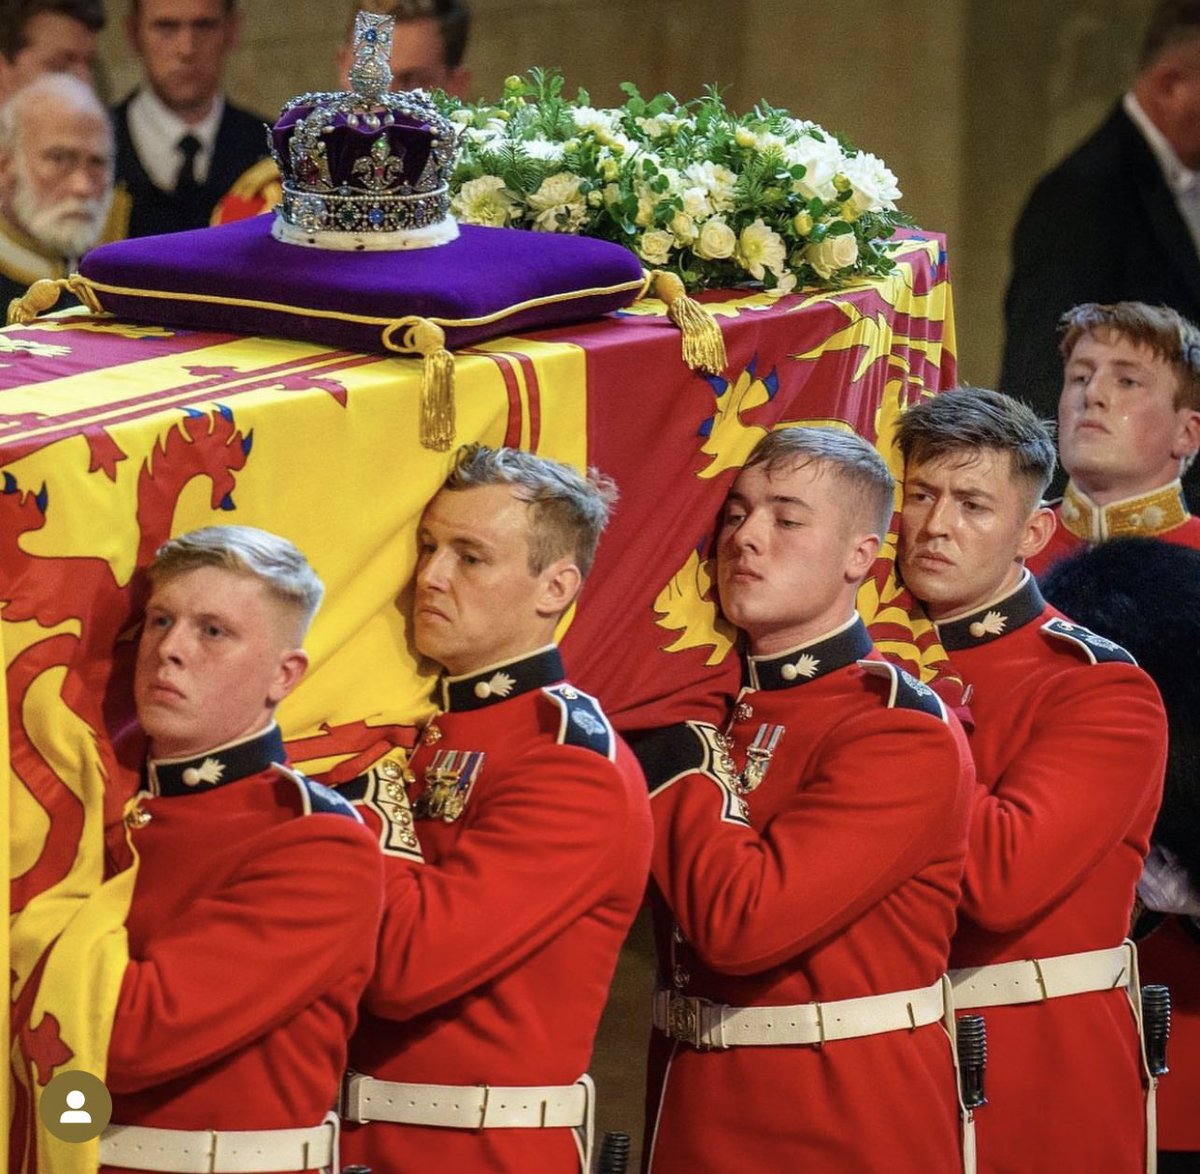 These guys did themselves, the armed forces & Britain proud on Monday. With the world watching the pressure must of been unimaginable but they carried out their duty with such professionalism & grace. #queensfuneral